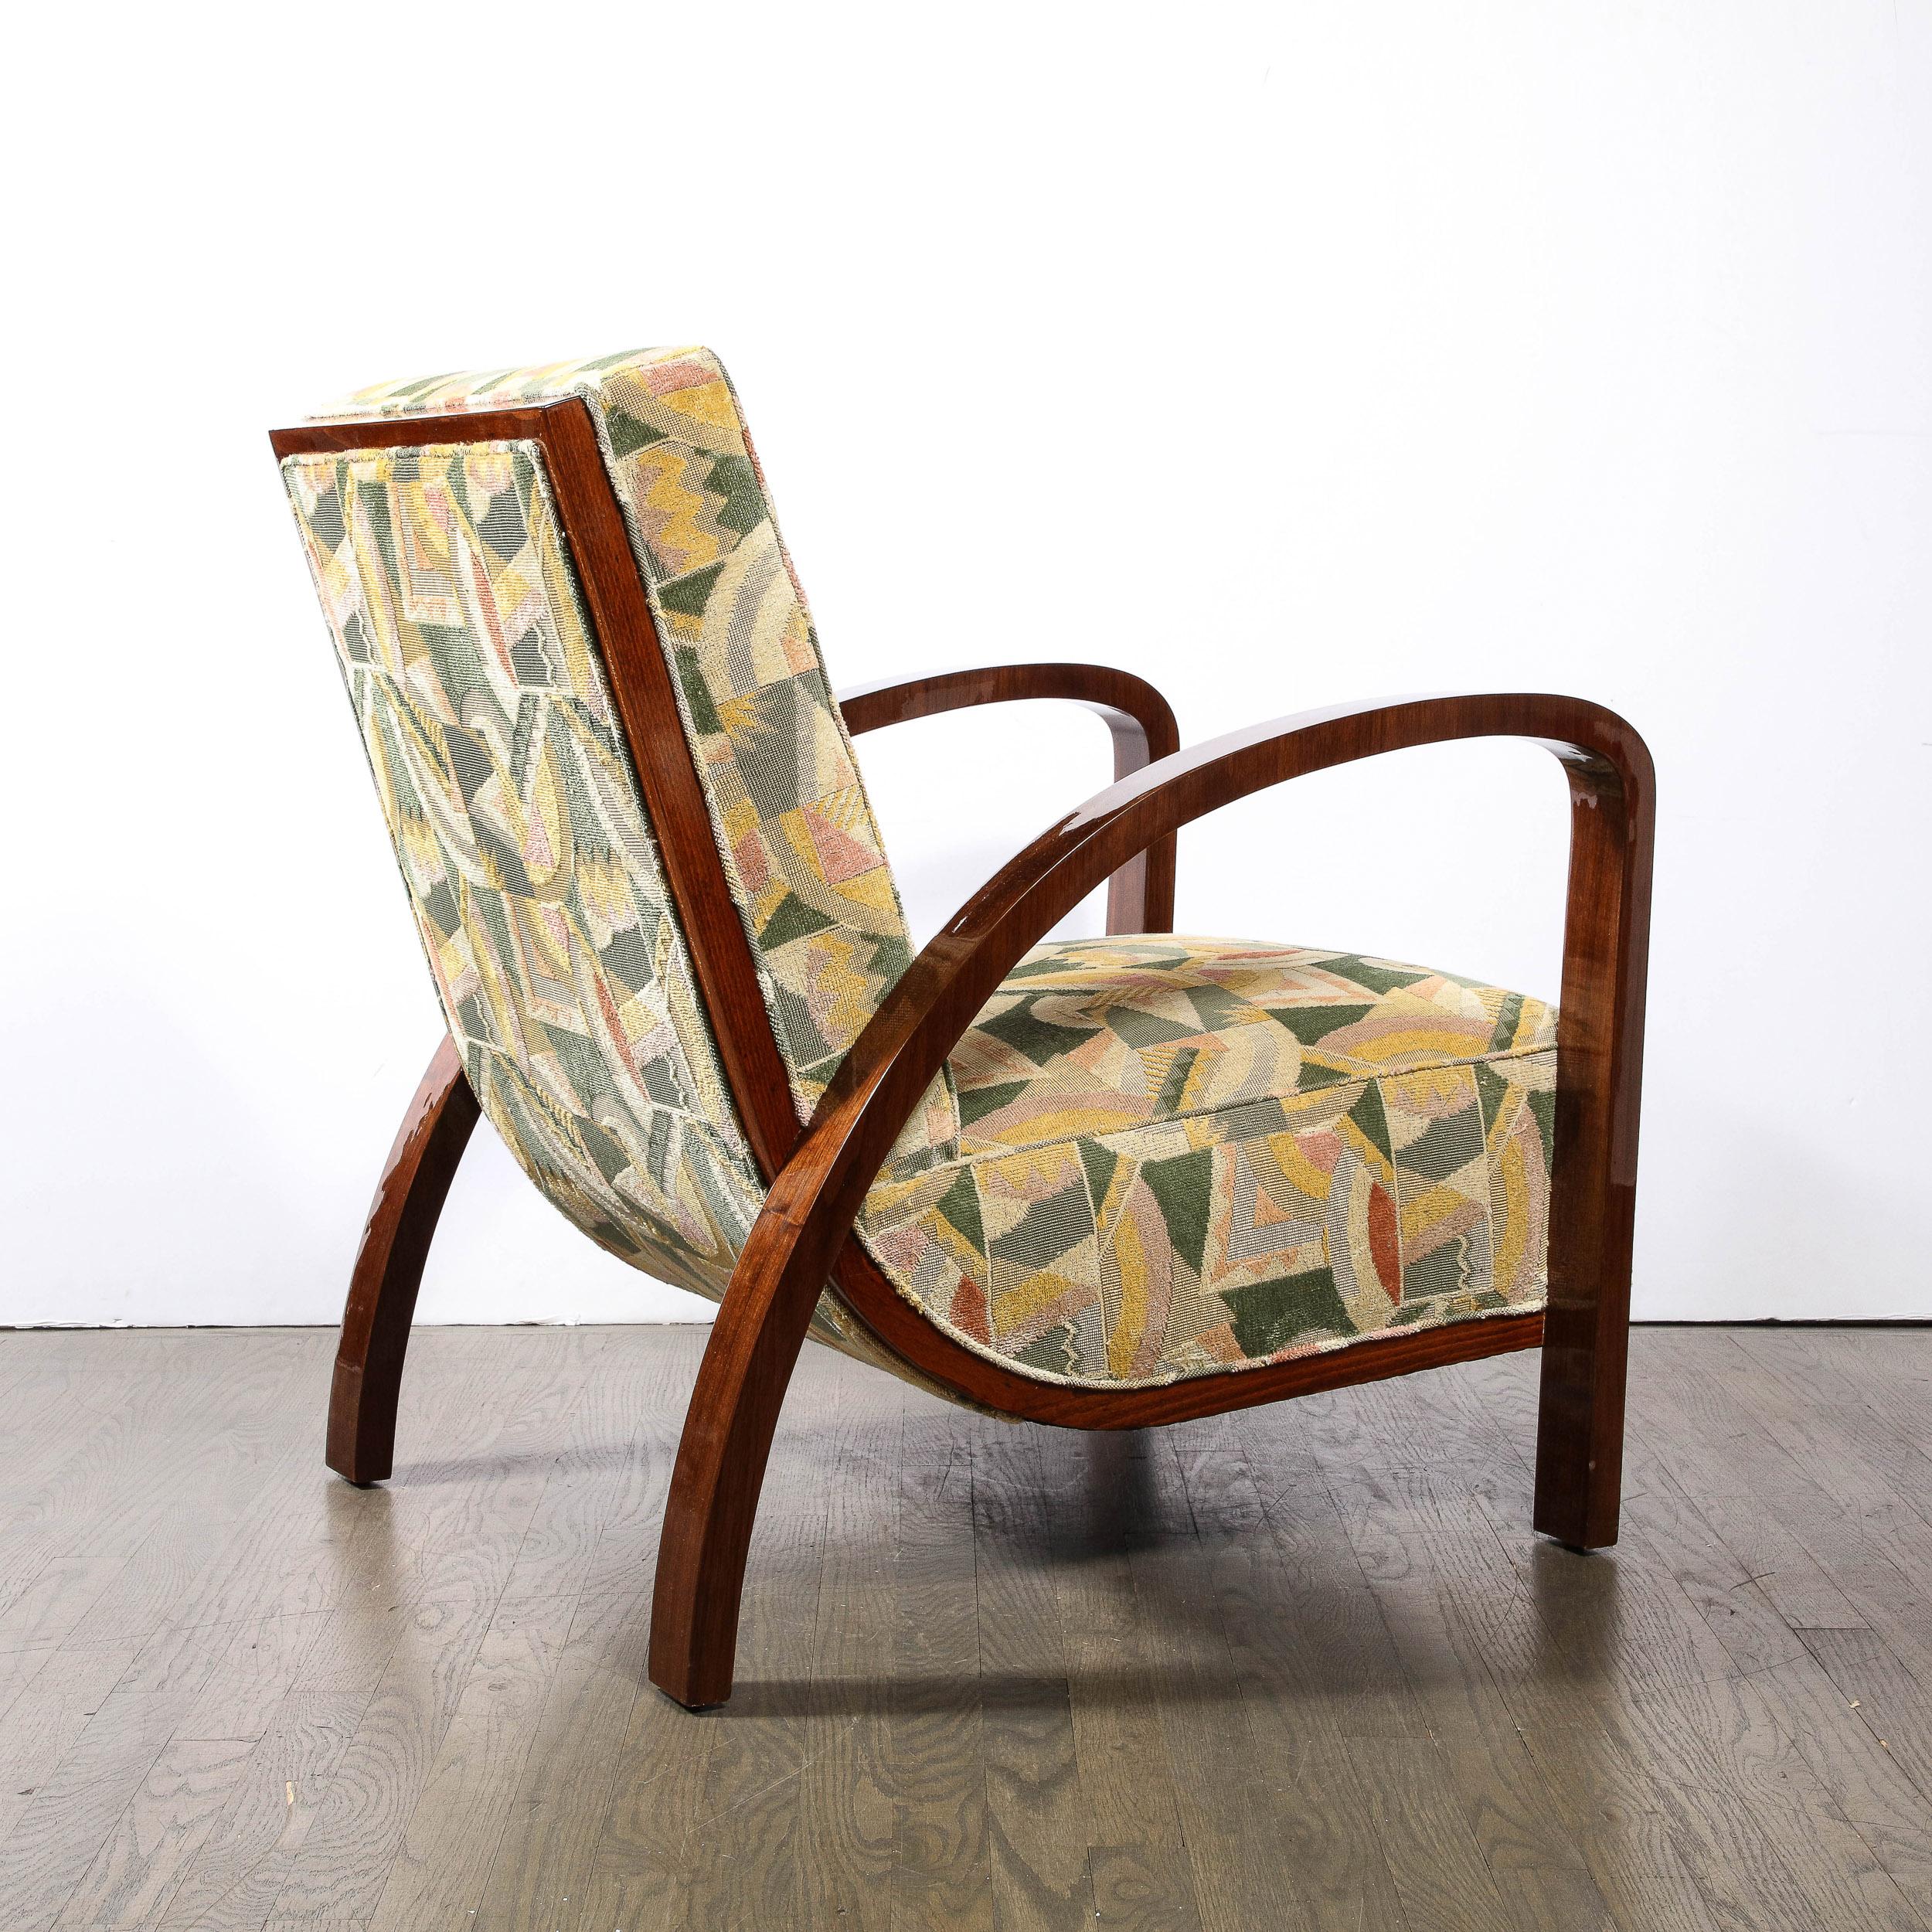 Pair of Art Deco Halabala Arm Chairs in Walnut & Rare Clarence House Fabric For Sale 4